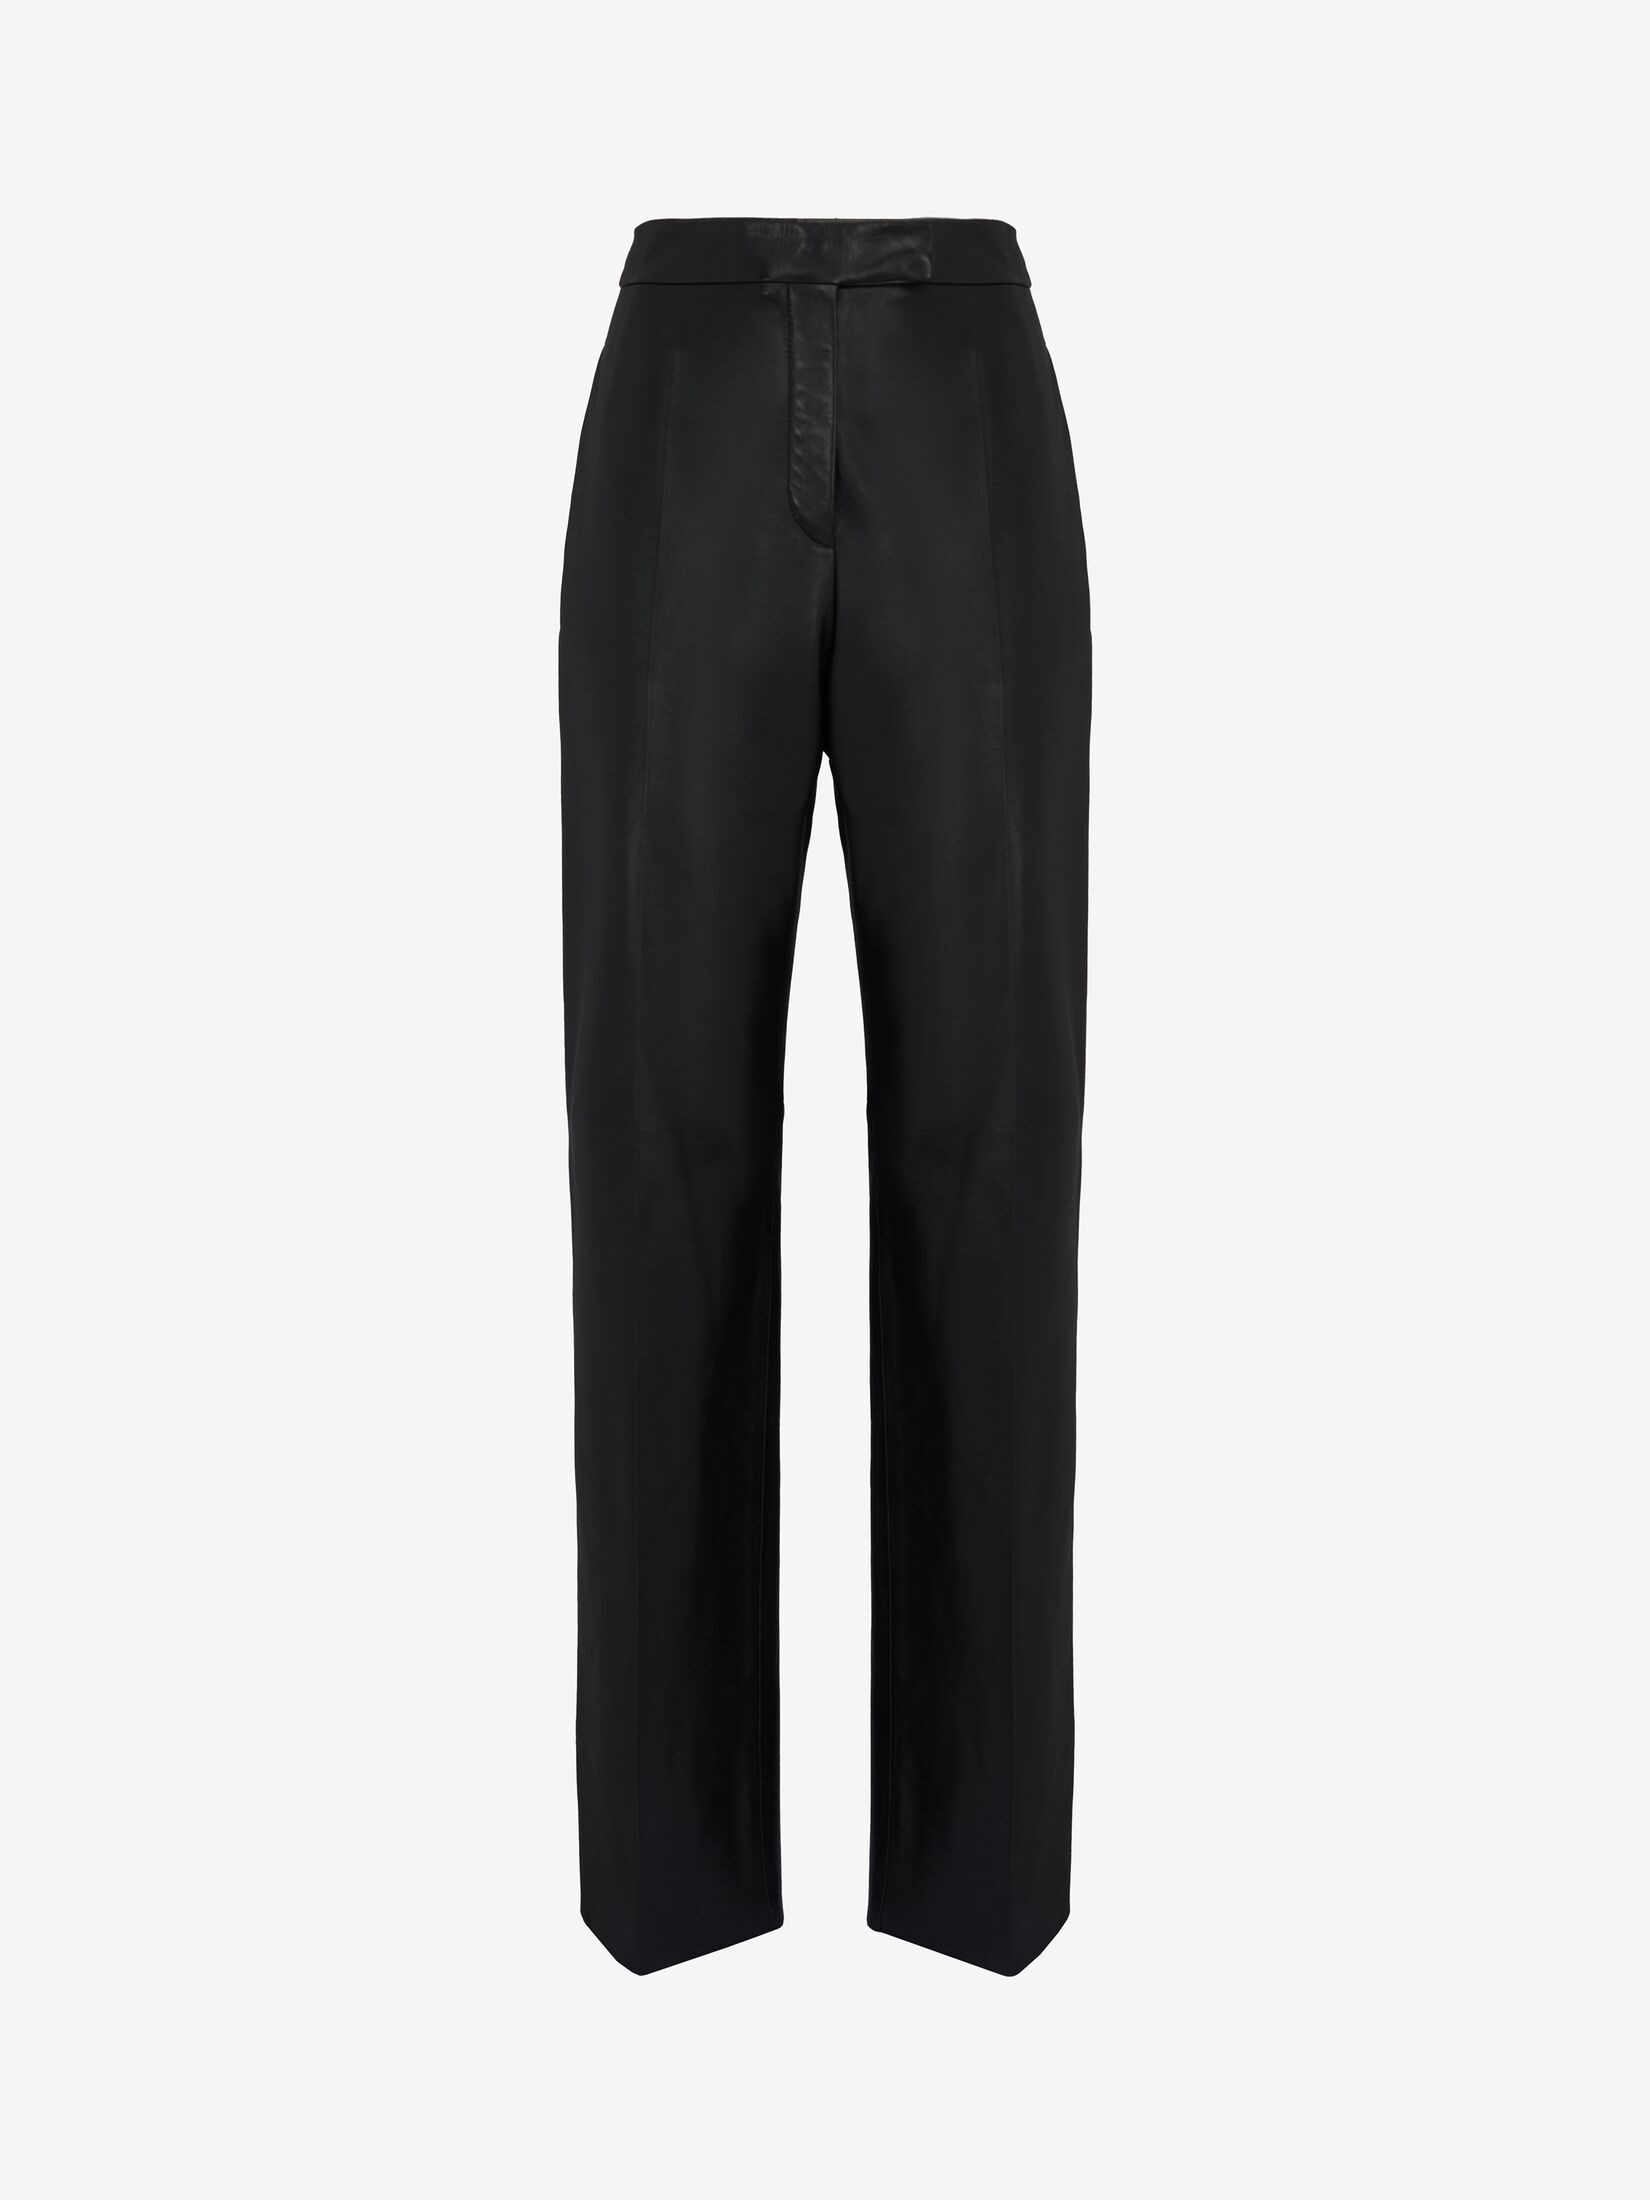 Women's High-waisted Leather Trousers in Black - 1